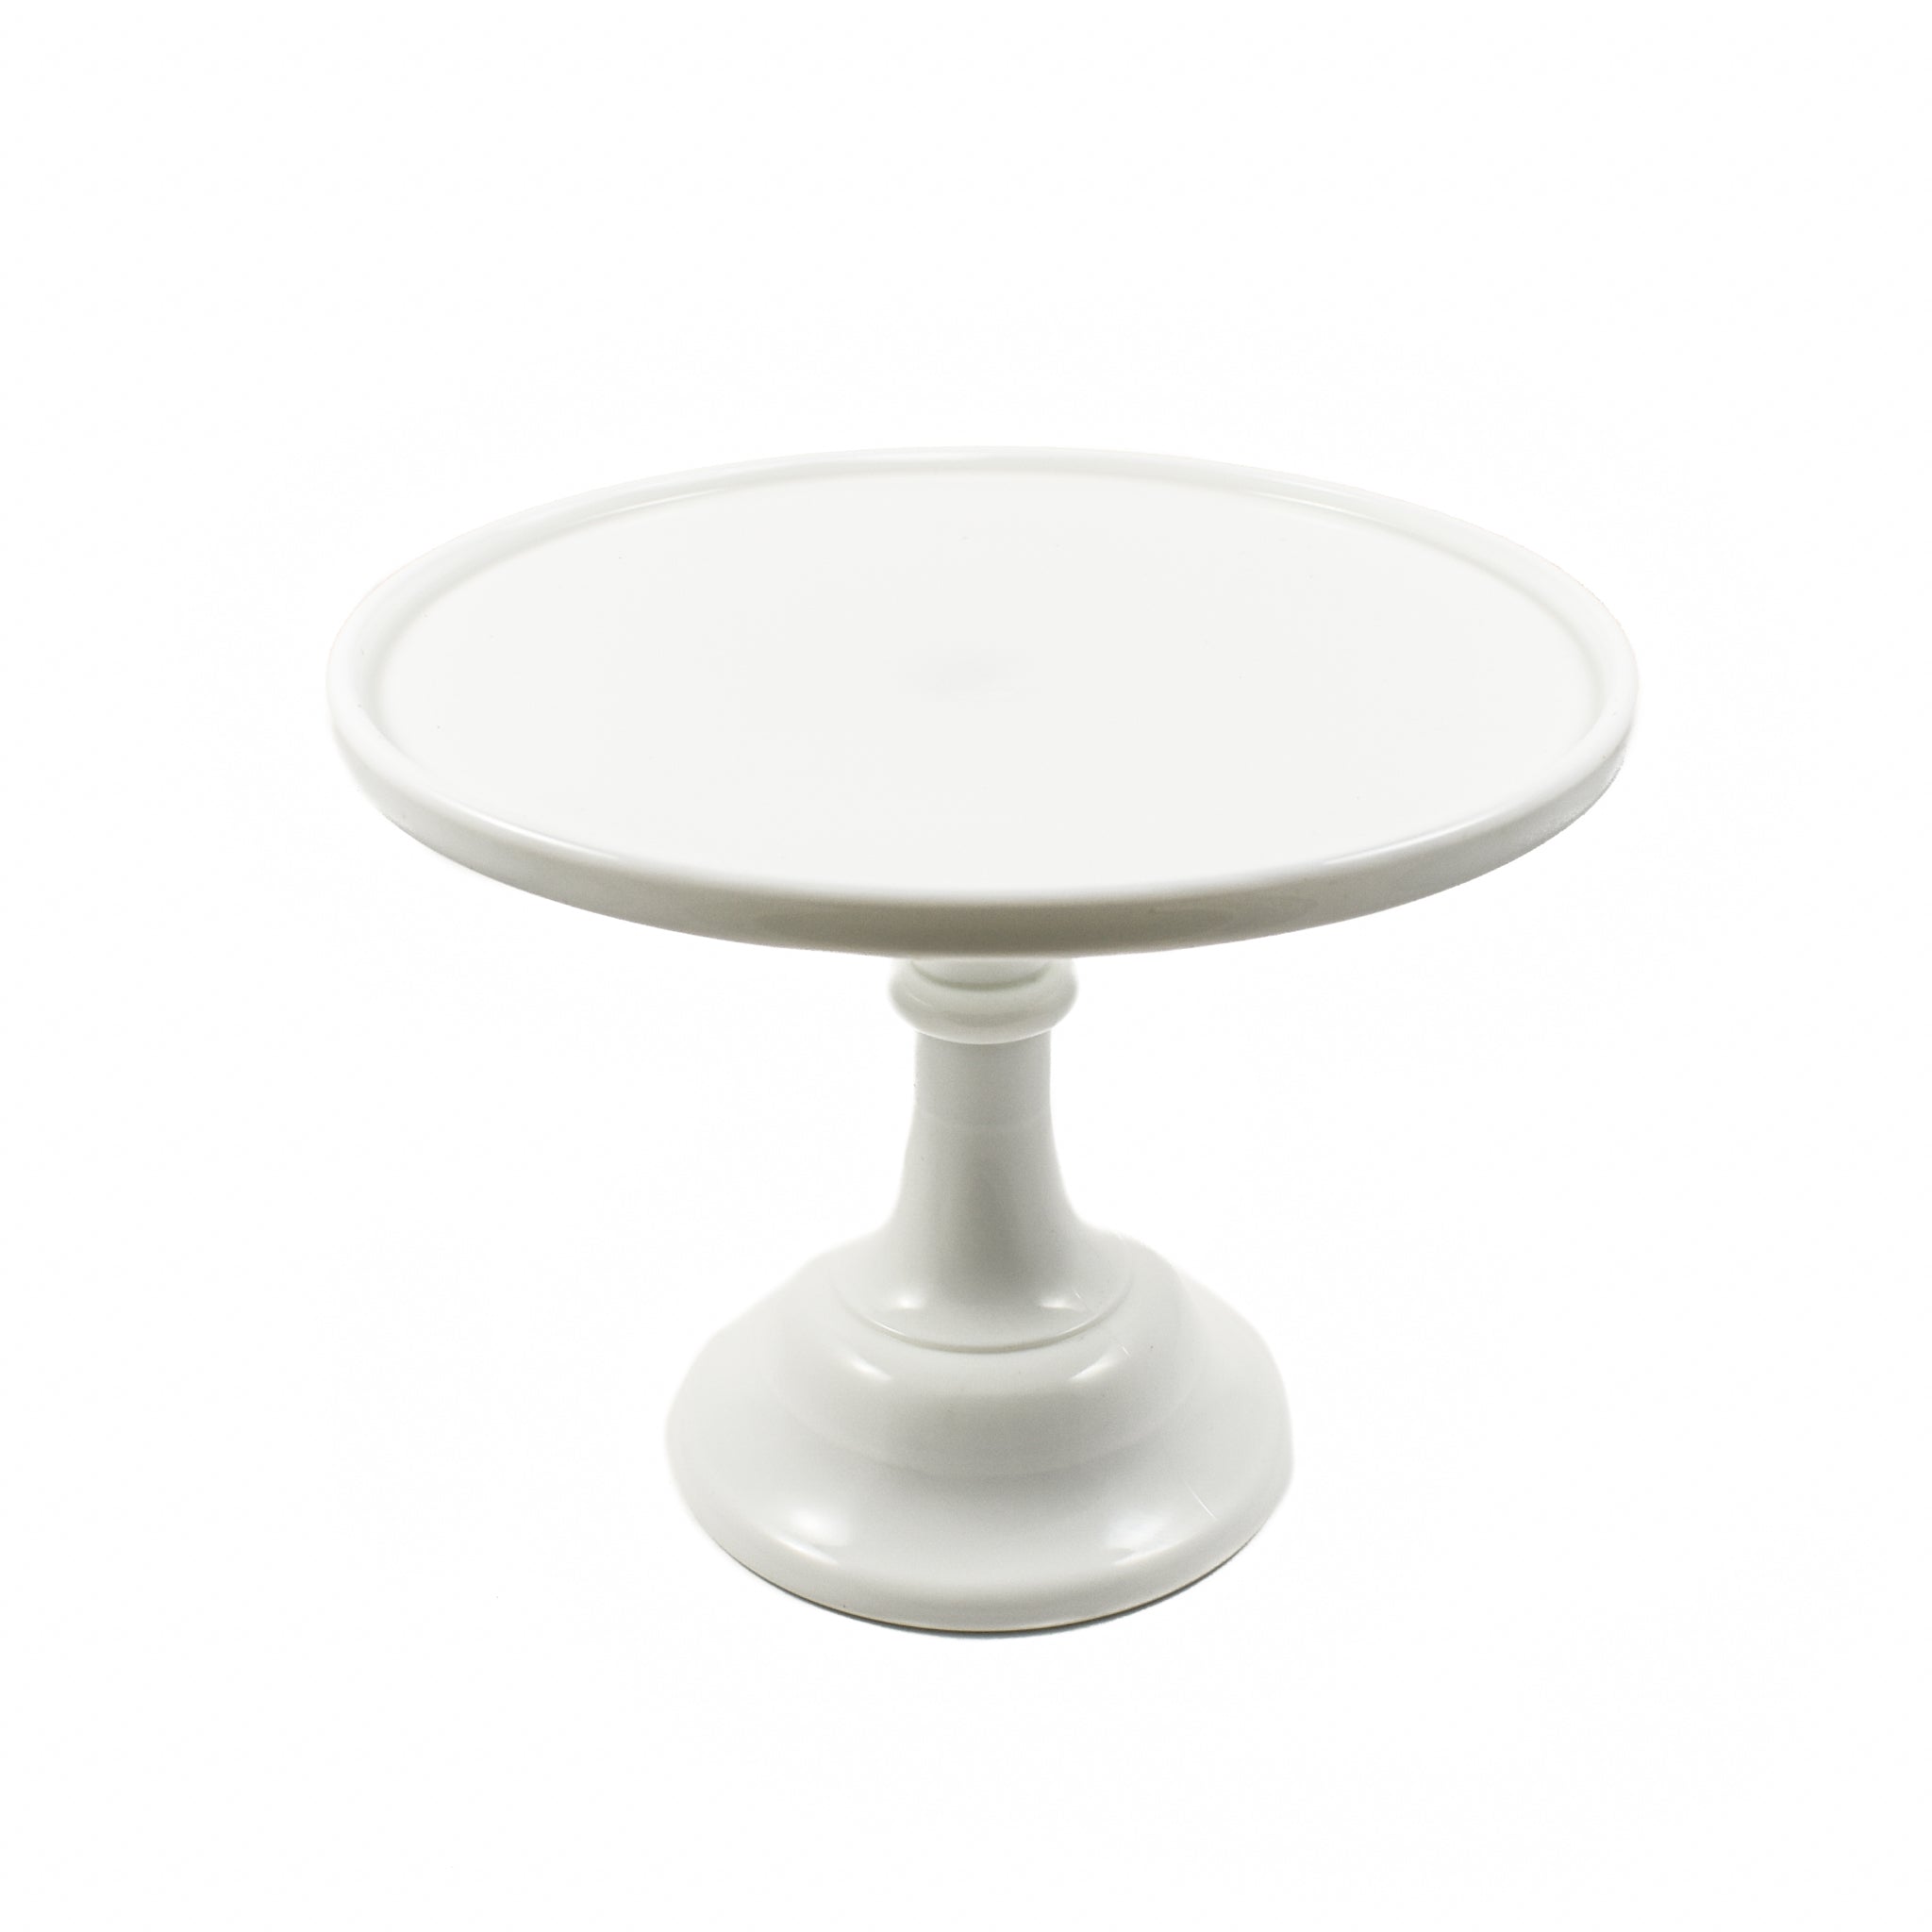 Light Weight And Premium Material White Color Round Shape Plastic Cake Stand  Capacity 2 KgHr at Best Price in Surat  Sai Enterprises